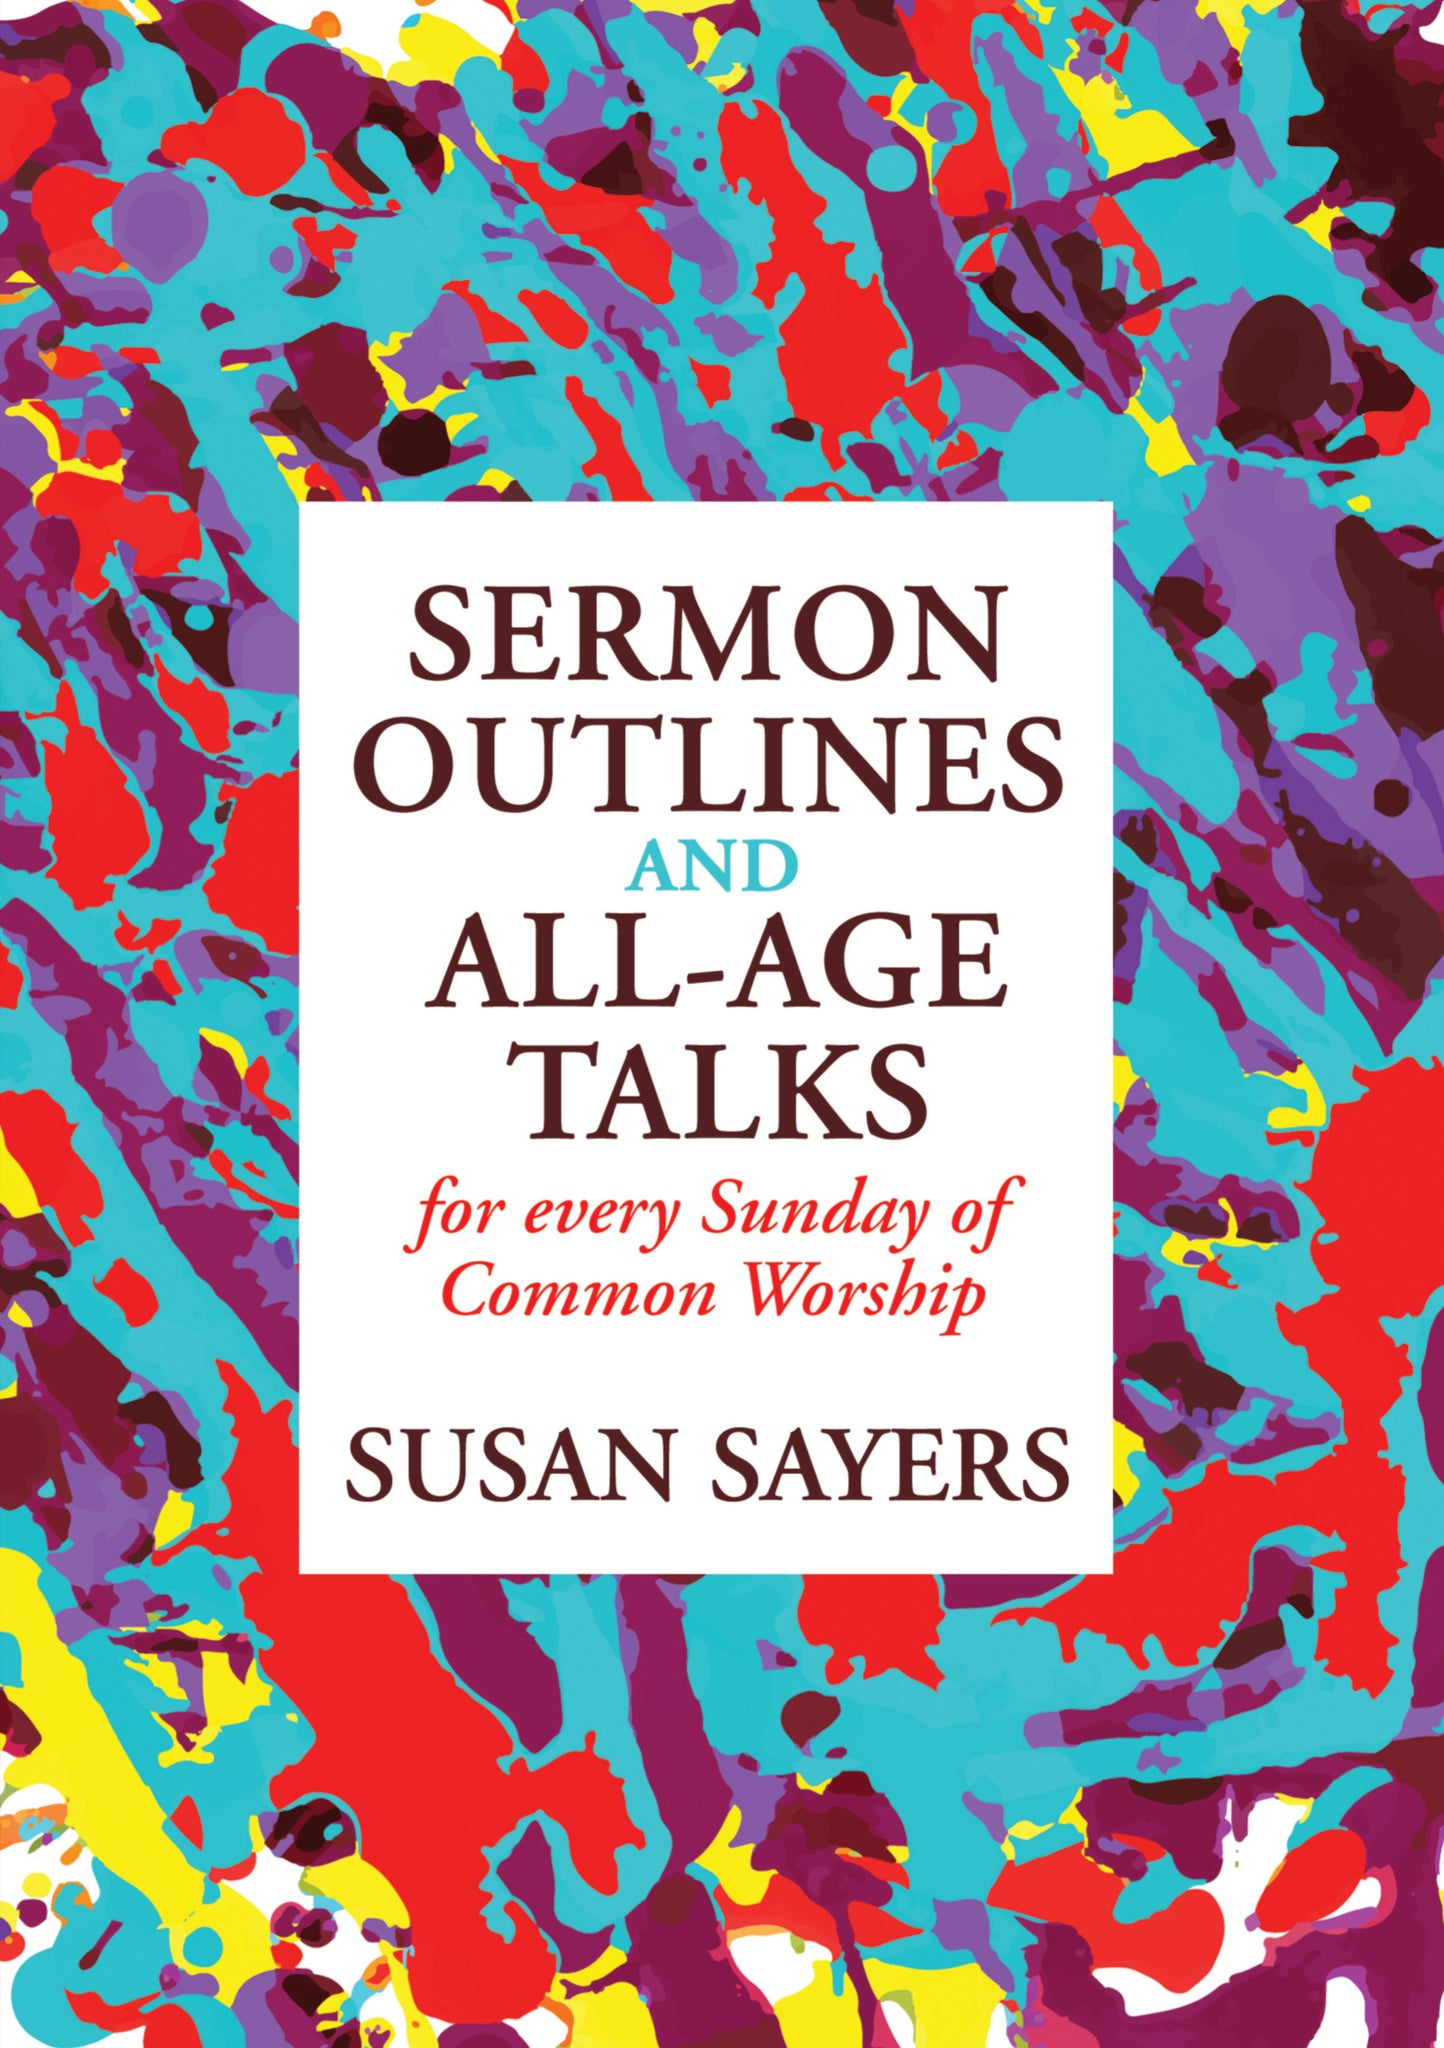 Sermon Outlines And All-Age Group TalksSermon Outlines And All-Age Group Talks